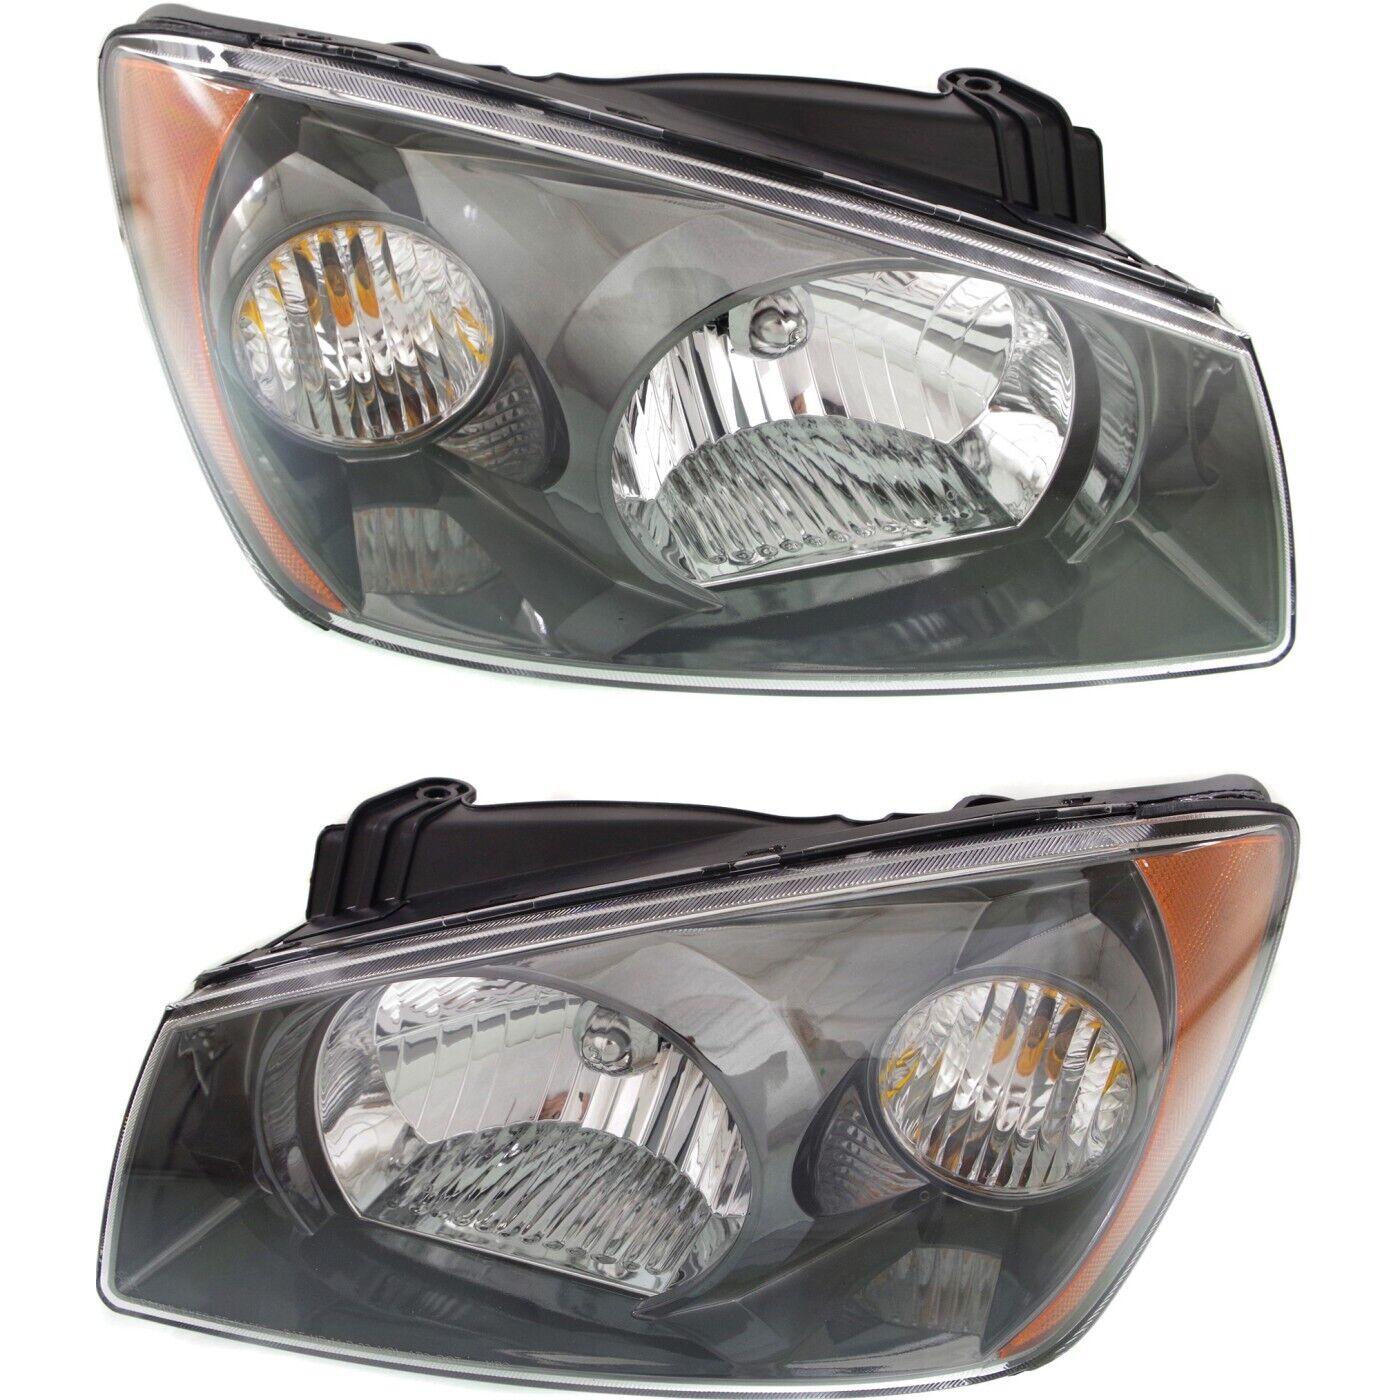 Headlight Set For 2004 2005 2006 Kia Spectra Left and Right With Bulb 2Pc